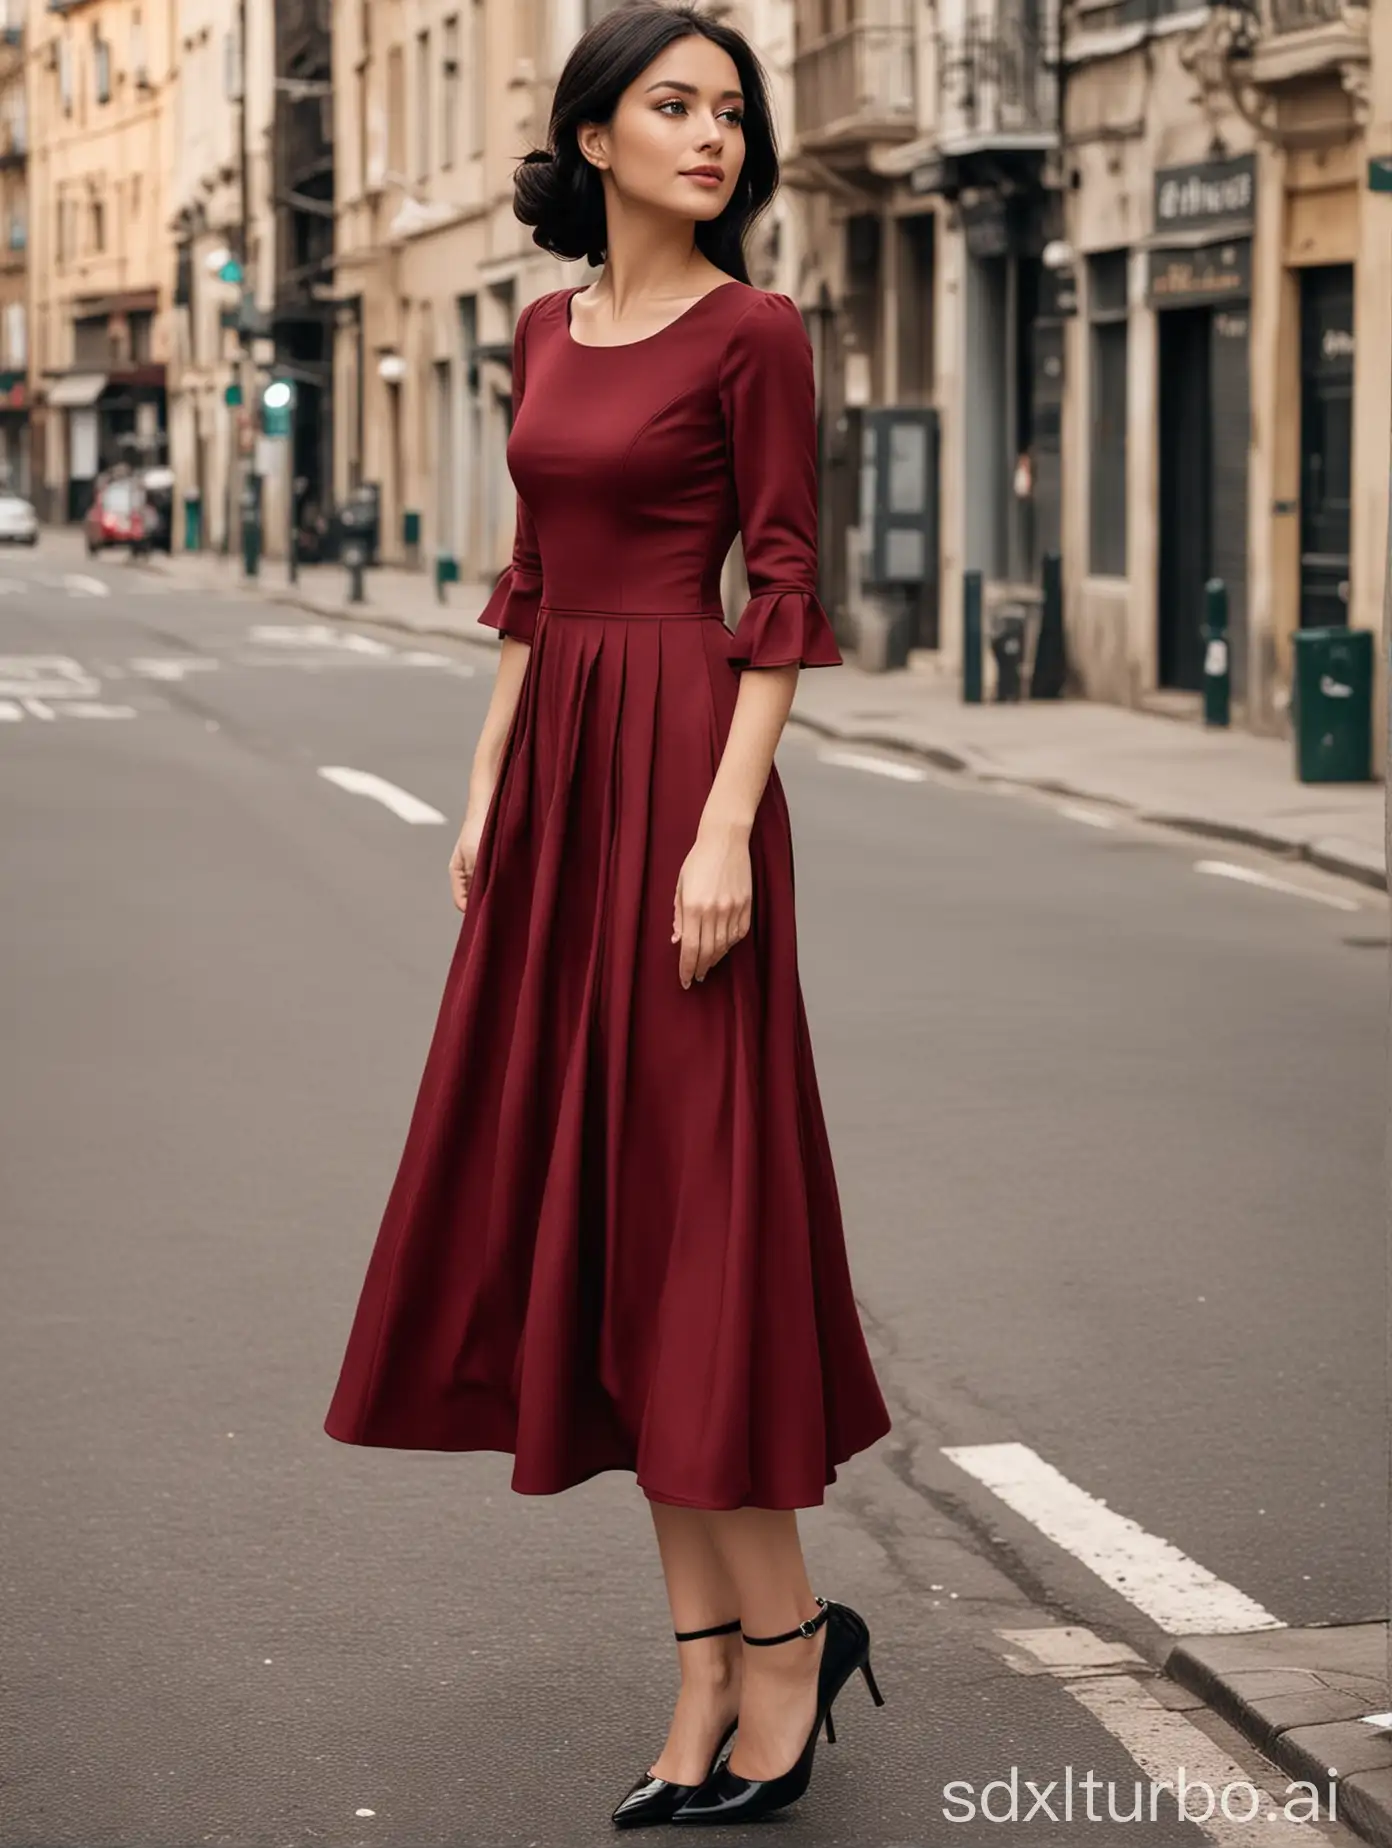 Elegant-Young-Woman-in-Maroon-Dress-on-City-Street